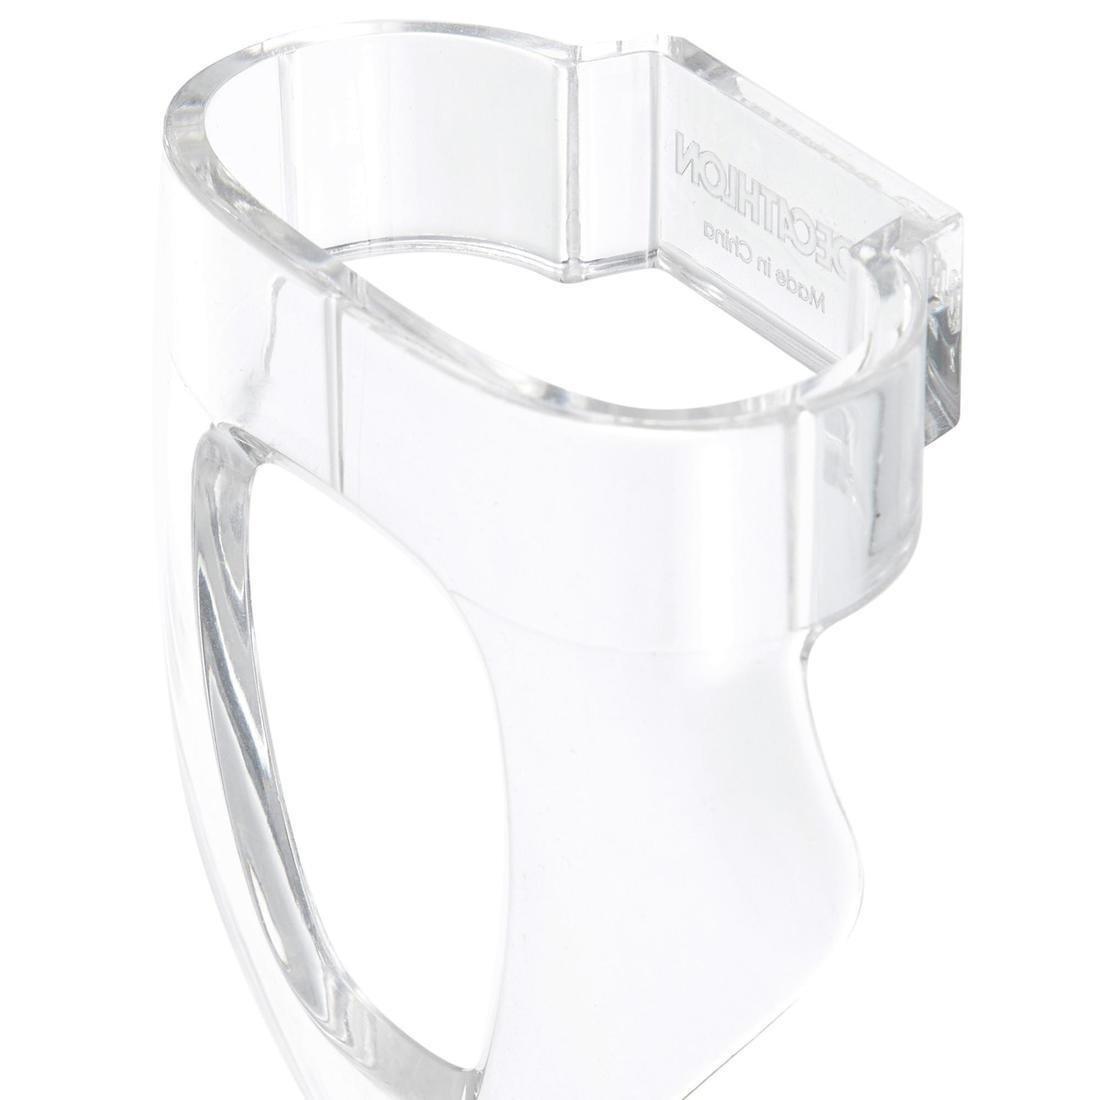 SUBEA - Camera Mount For The First Version Of The Easybreath Mask Without Nut.